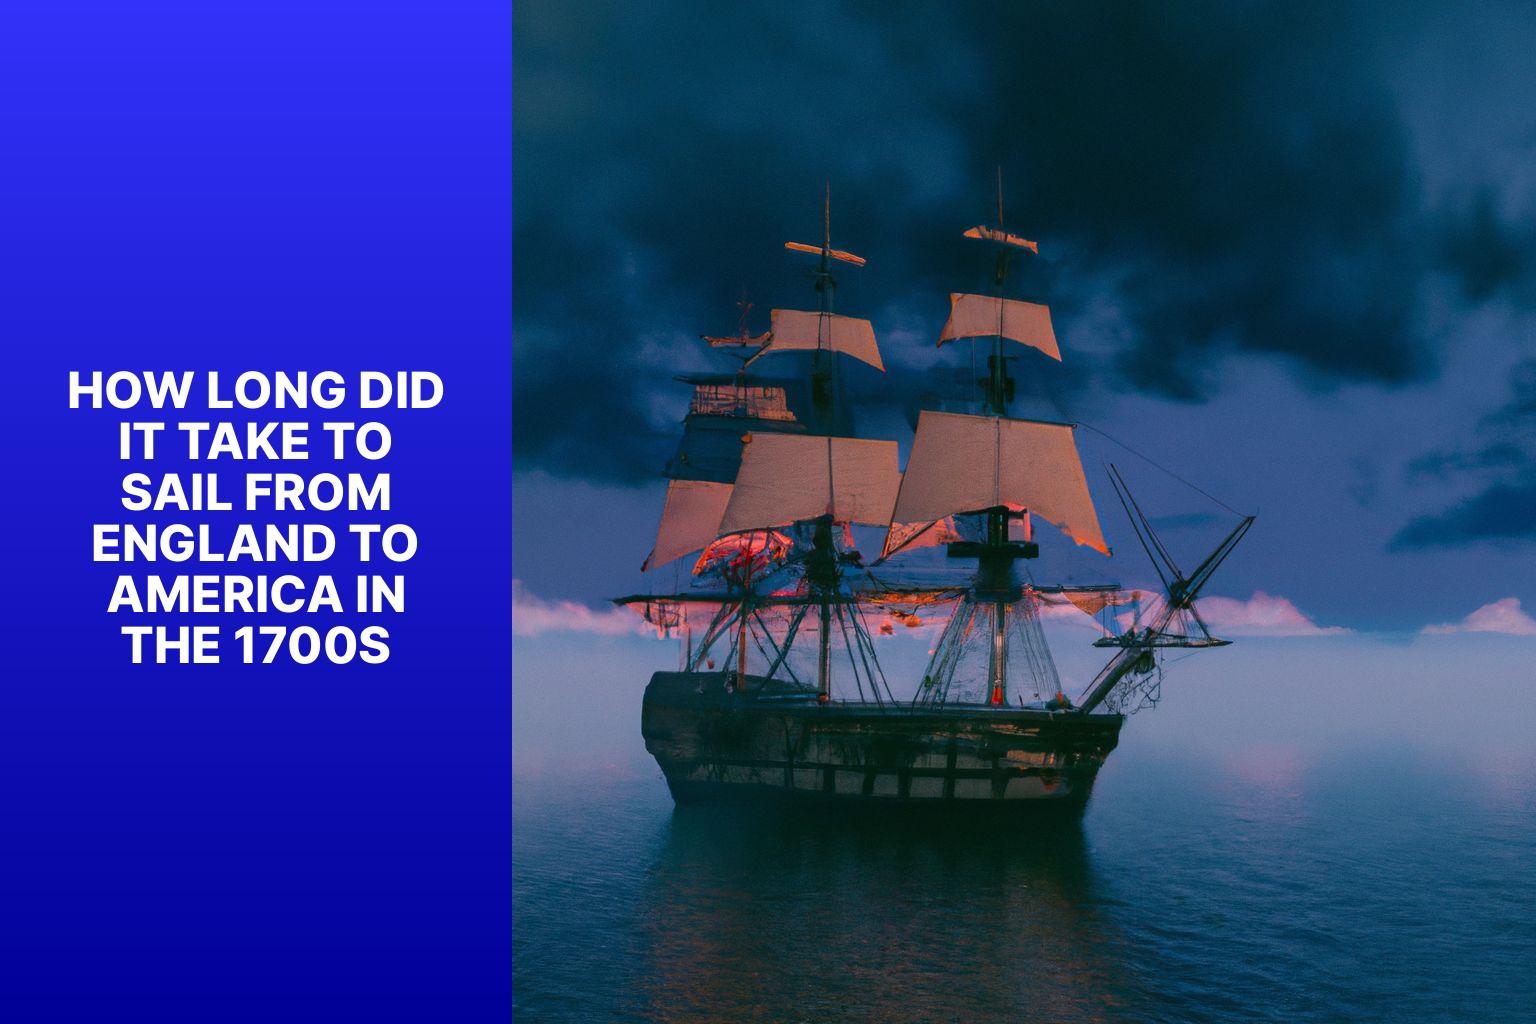 in the 1700's one could travel